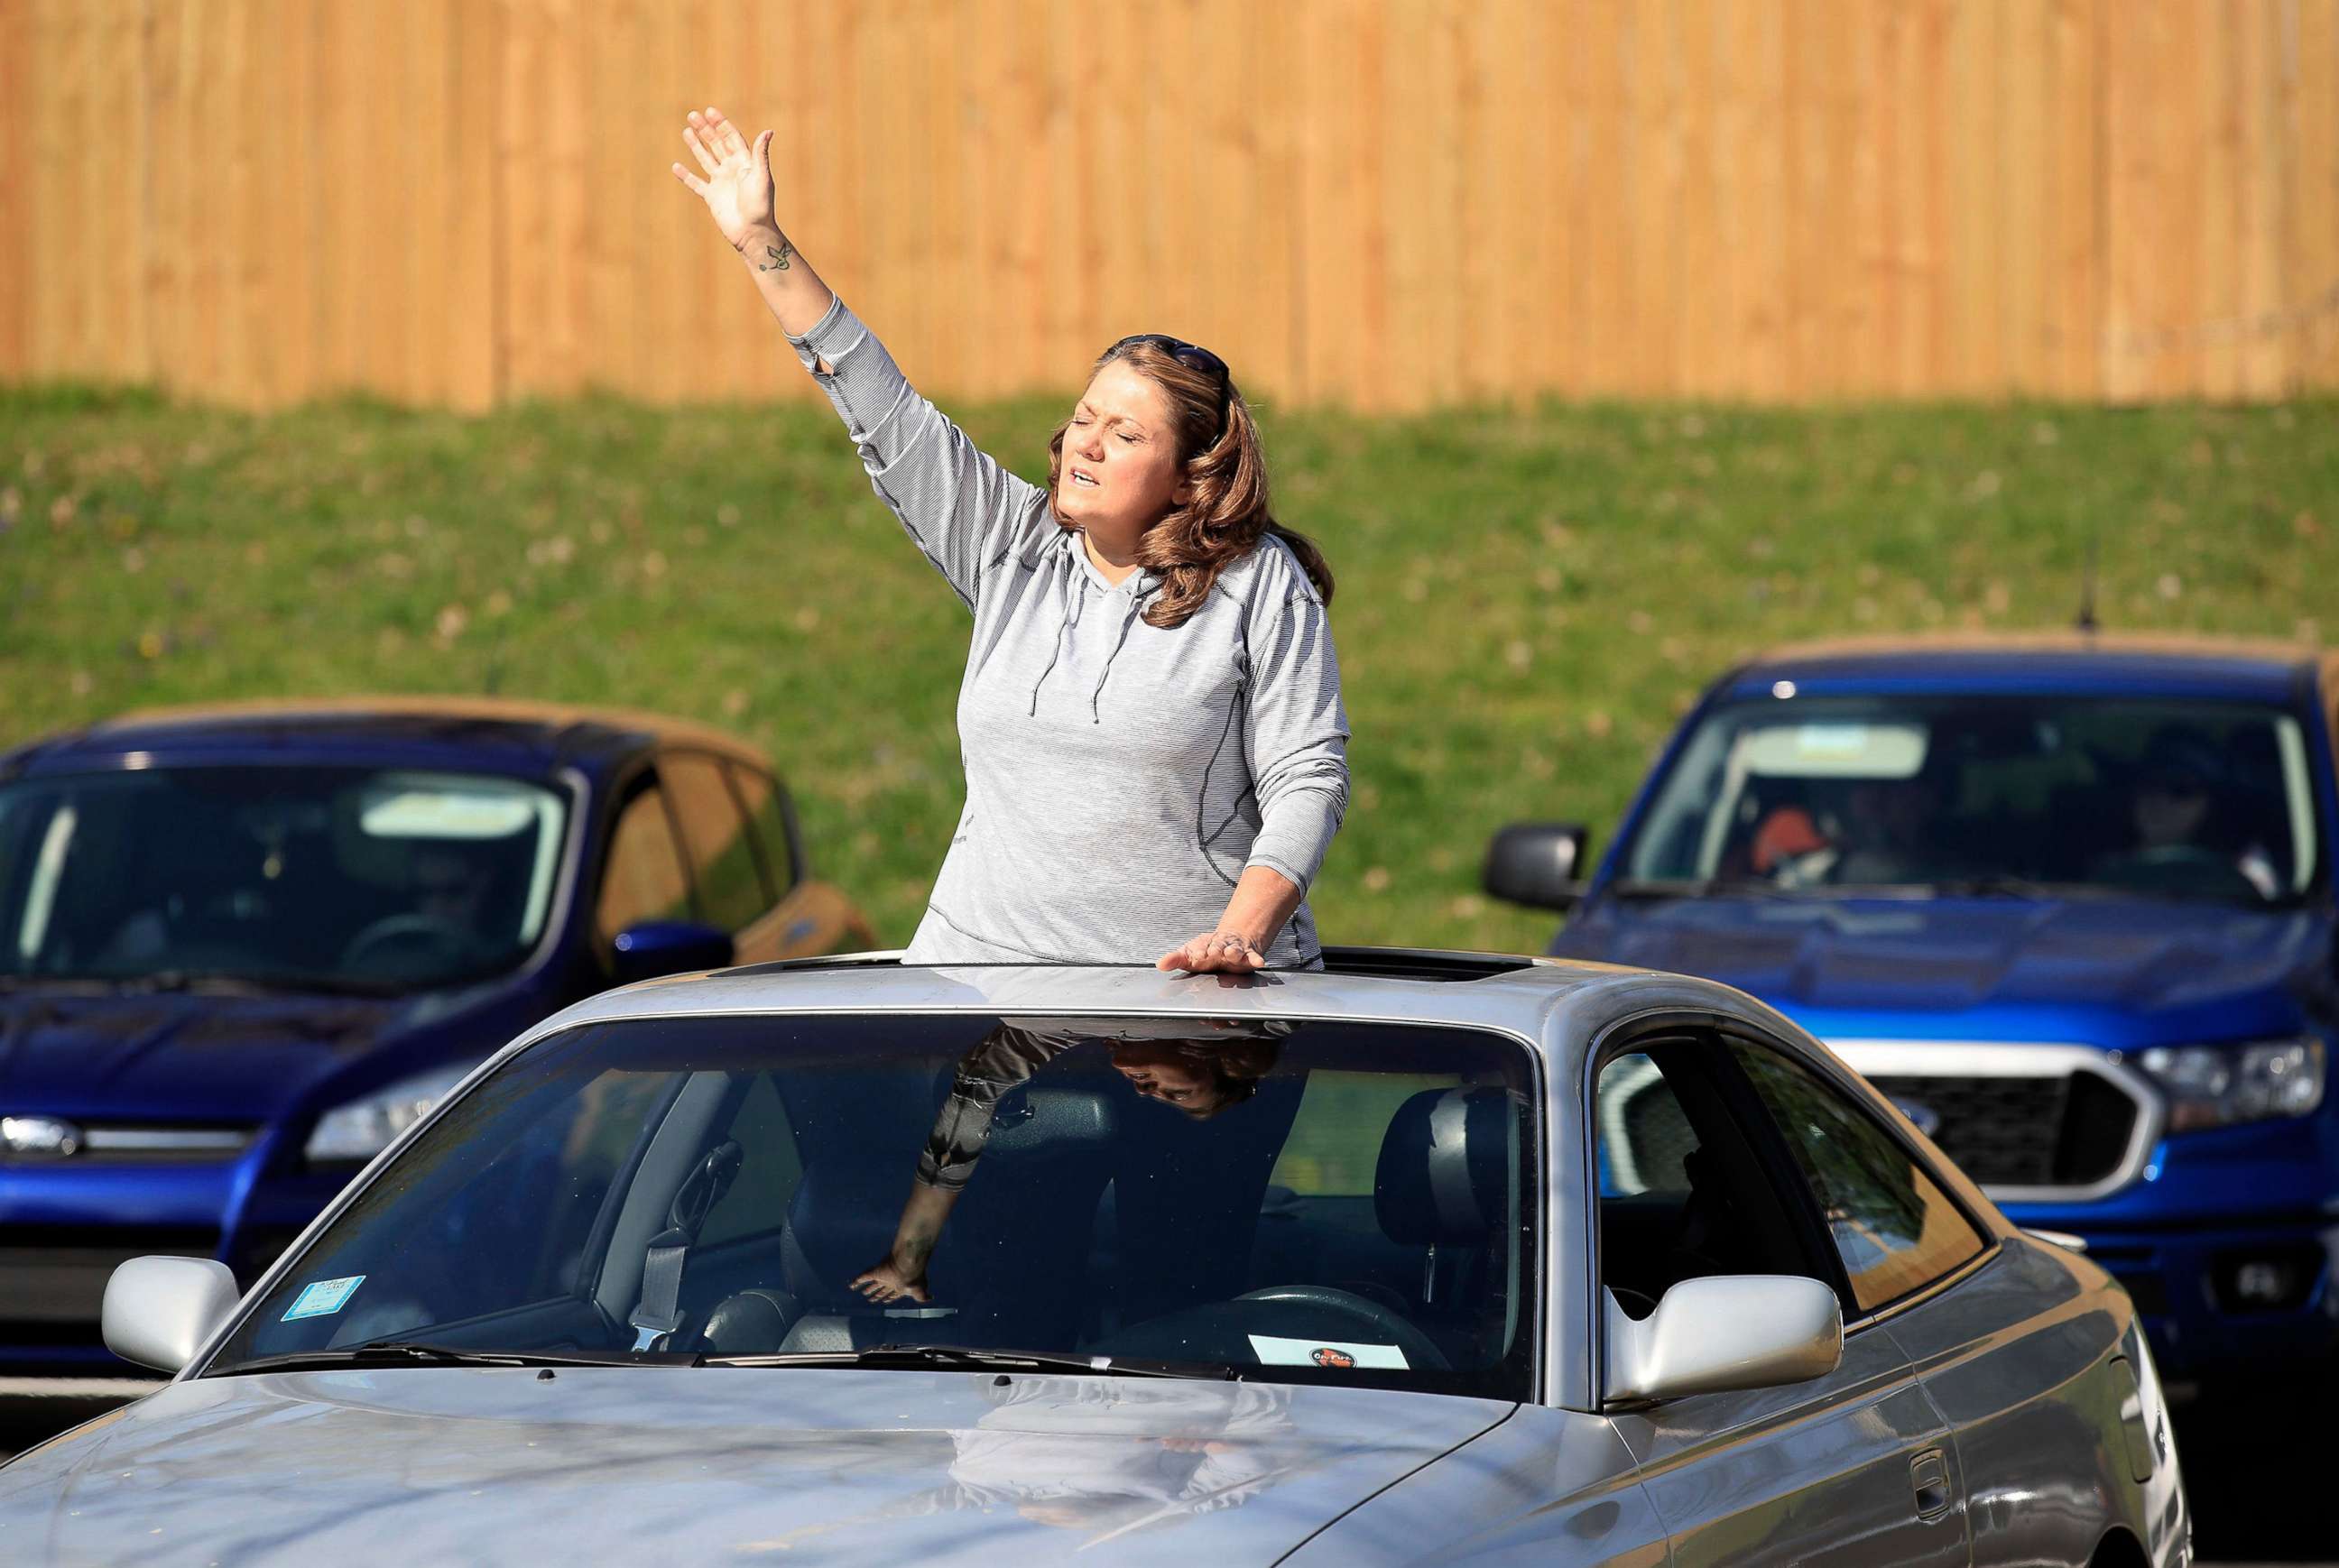 PHOTO: A worshiper listens to a song during the drive in service at On Fire Christian Church, on April 05, 2020, in Louisville, Kentucky.